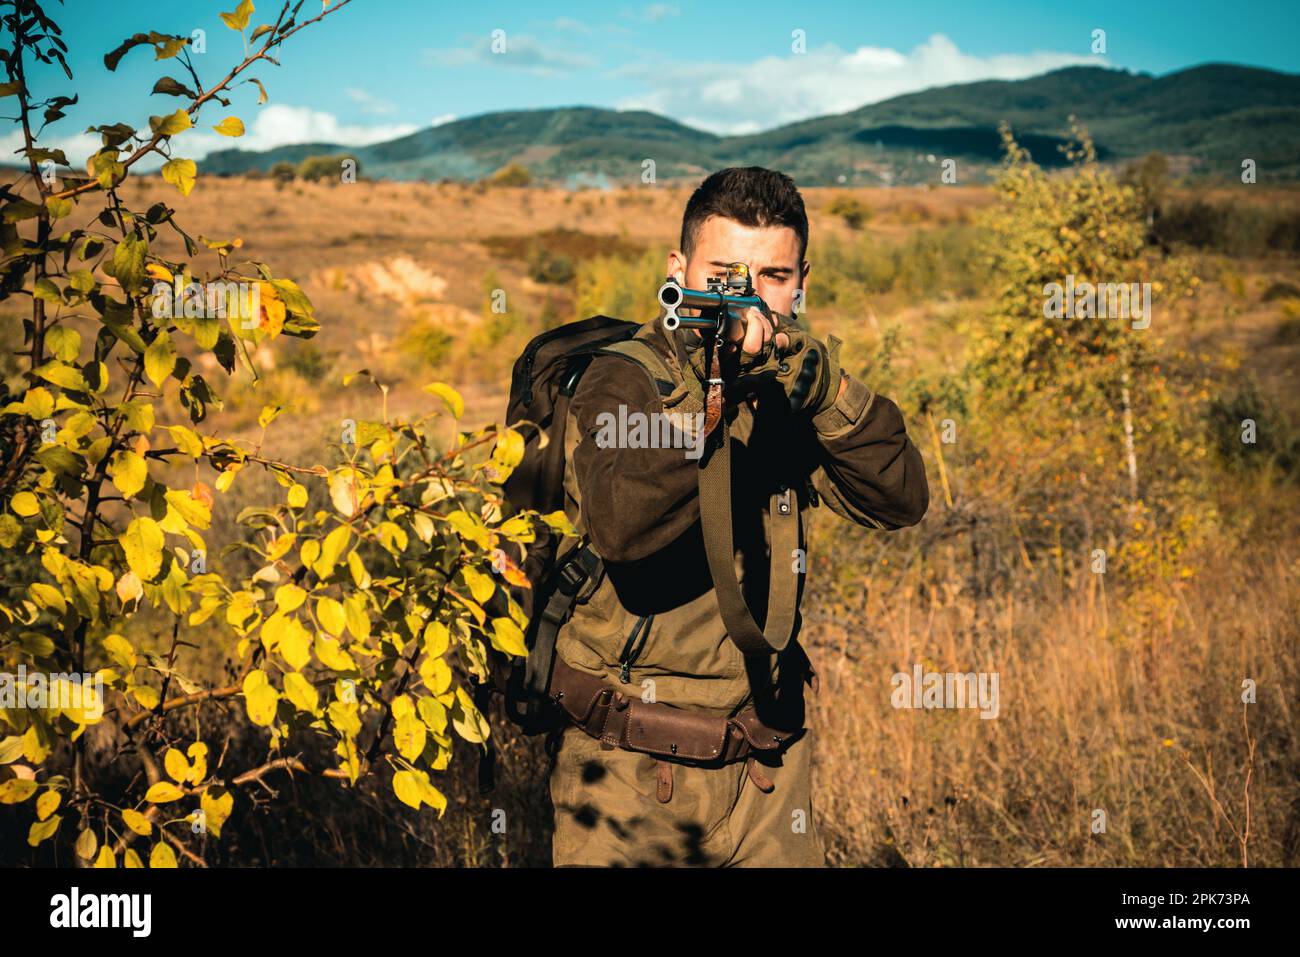 Hunter with Powerful Rifle with Scope Spotting Animals. Hunter with shotgun gun on hunt. Track down. Deer hunt. Stock Photo